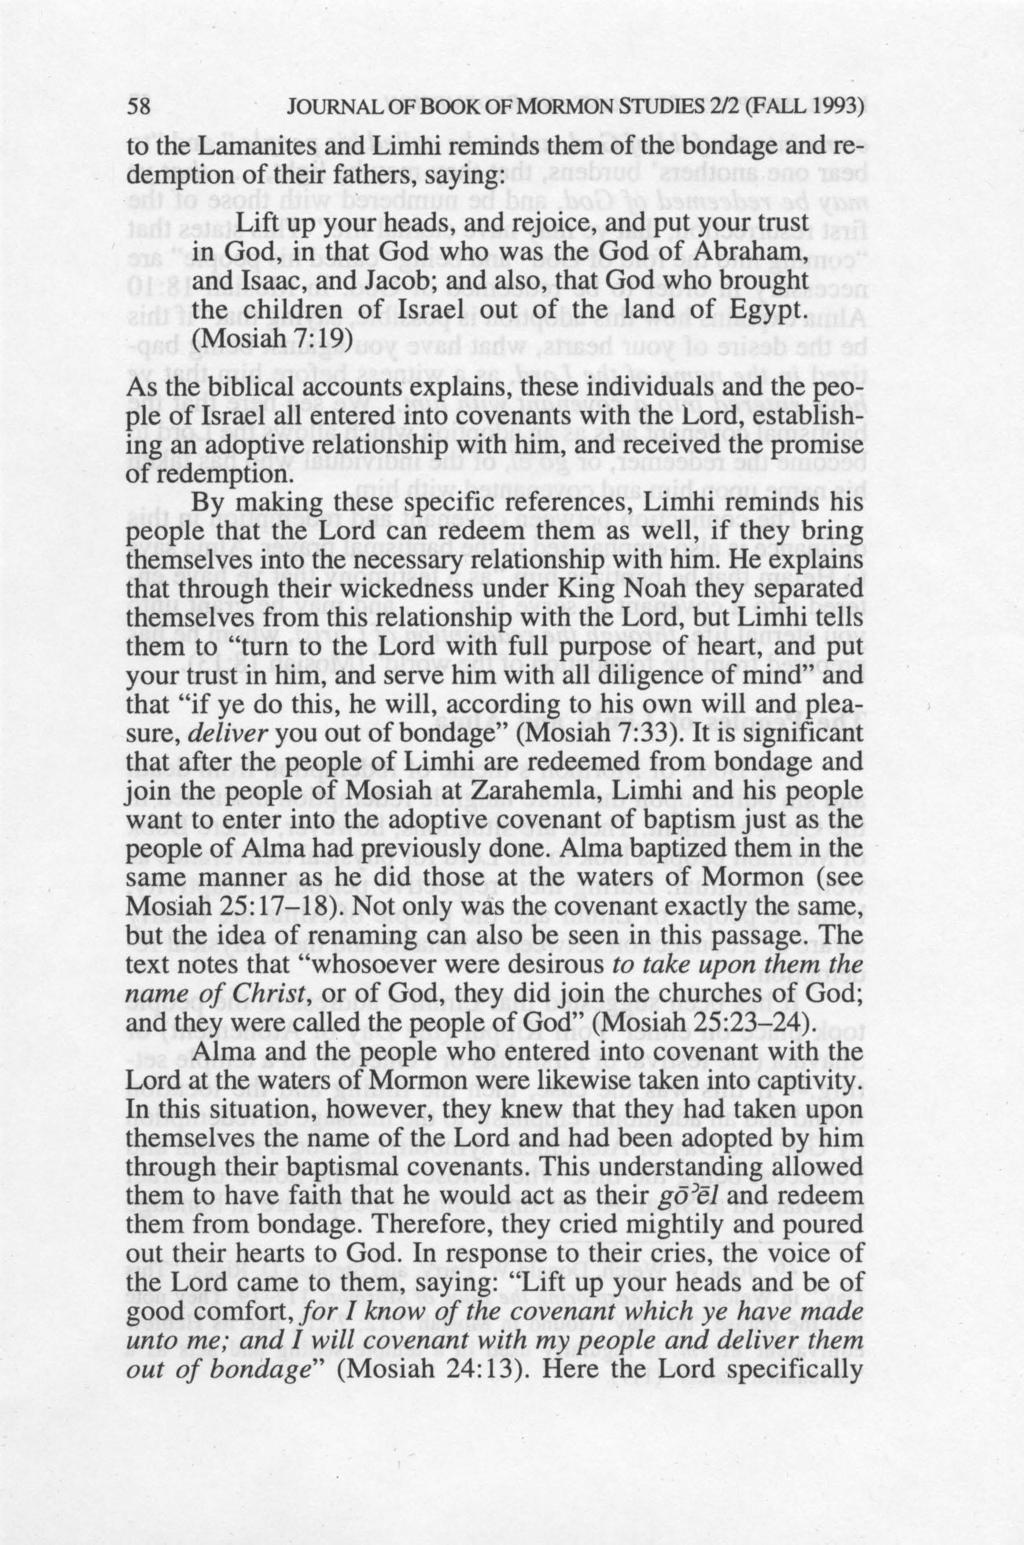 58 JOURNAL OF BOOK OF MORMON STUDIES 212 (FALL 1993) to the Lamanites and Limhi reminds them of the bondage and redemption of their fathers, saying: Lift up your heads, and rejoice, and put your